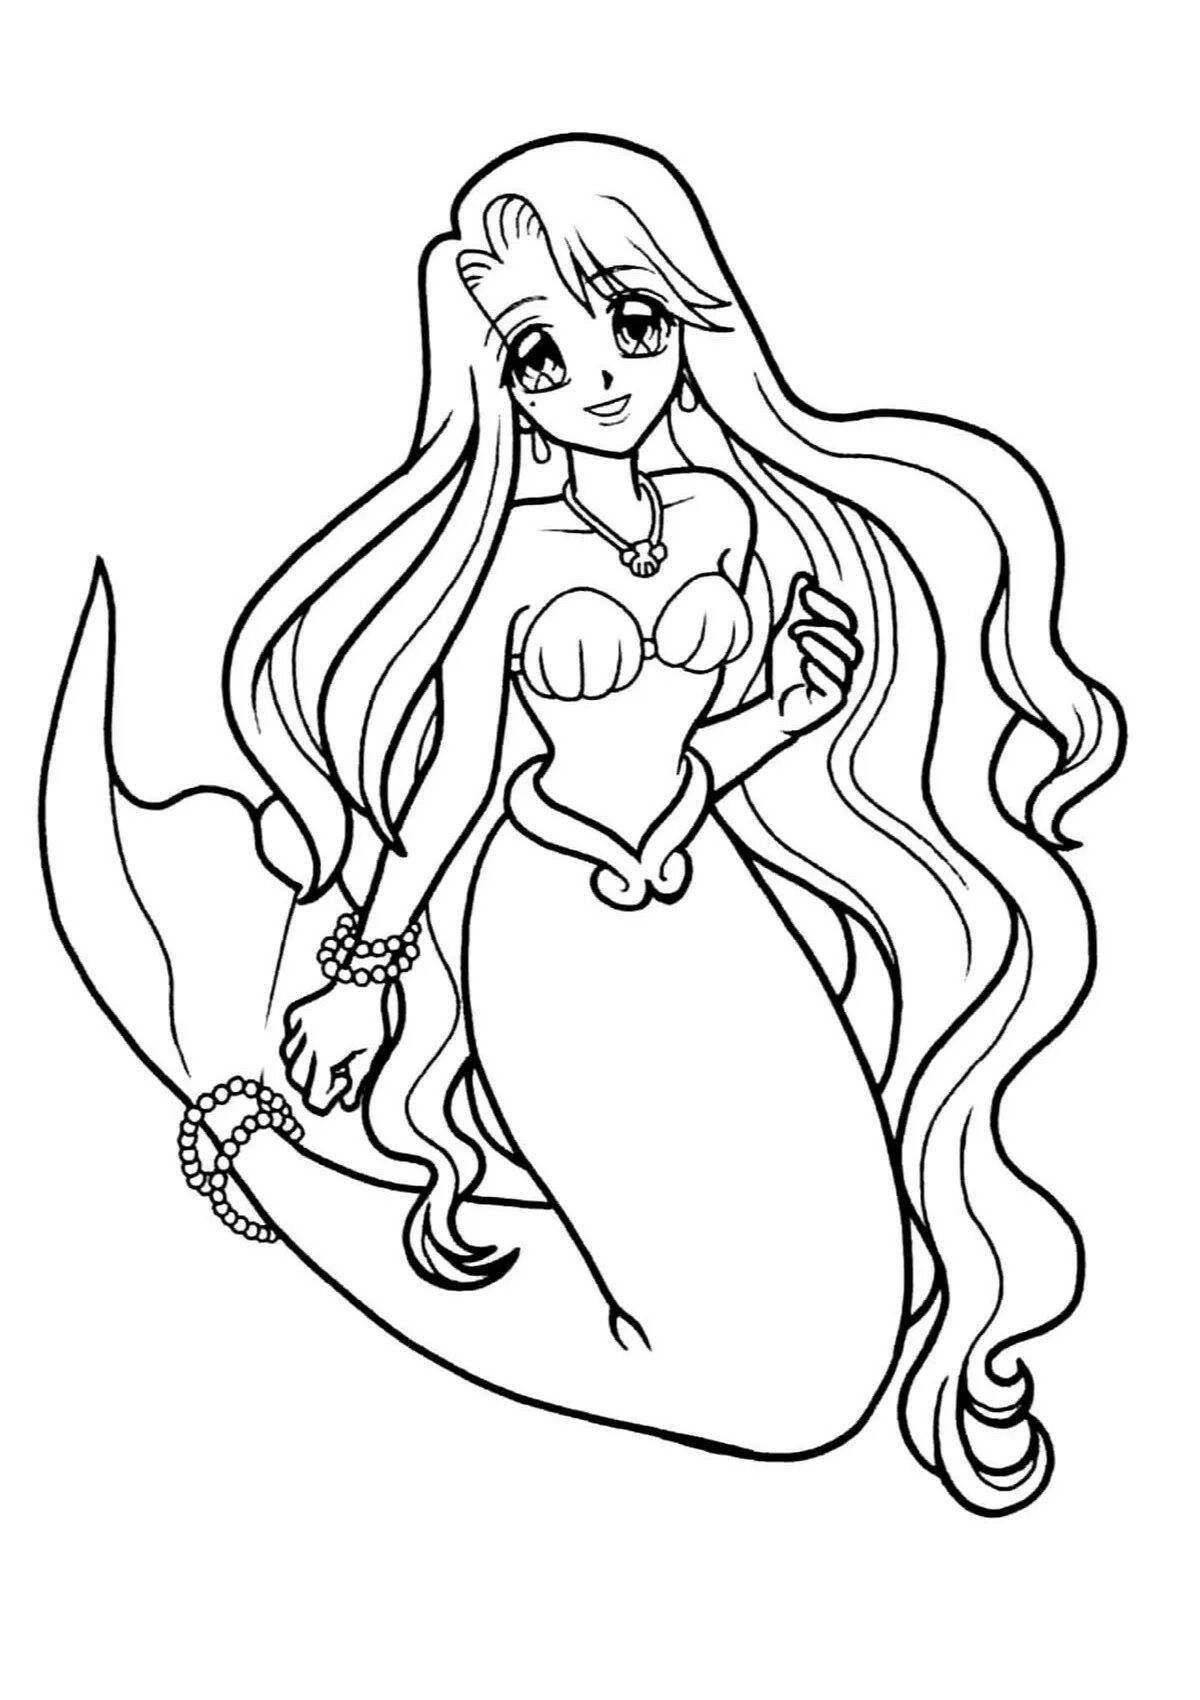 Coloring pages mermaid for girls